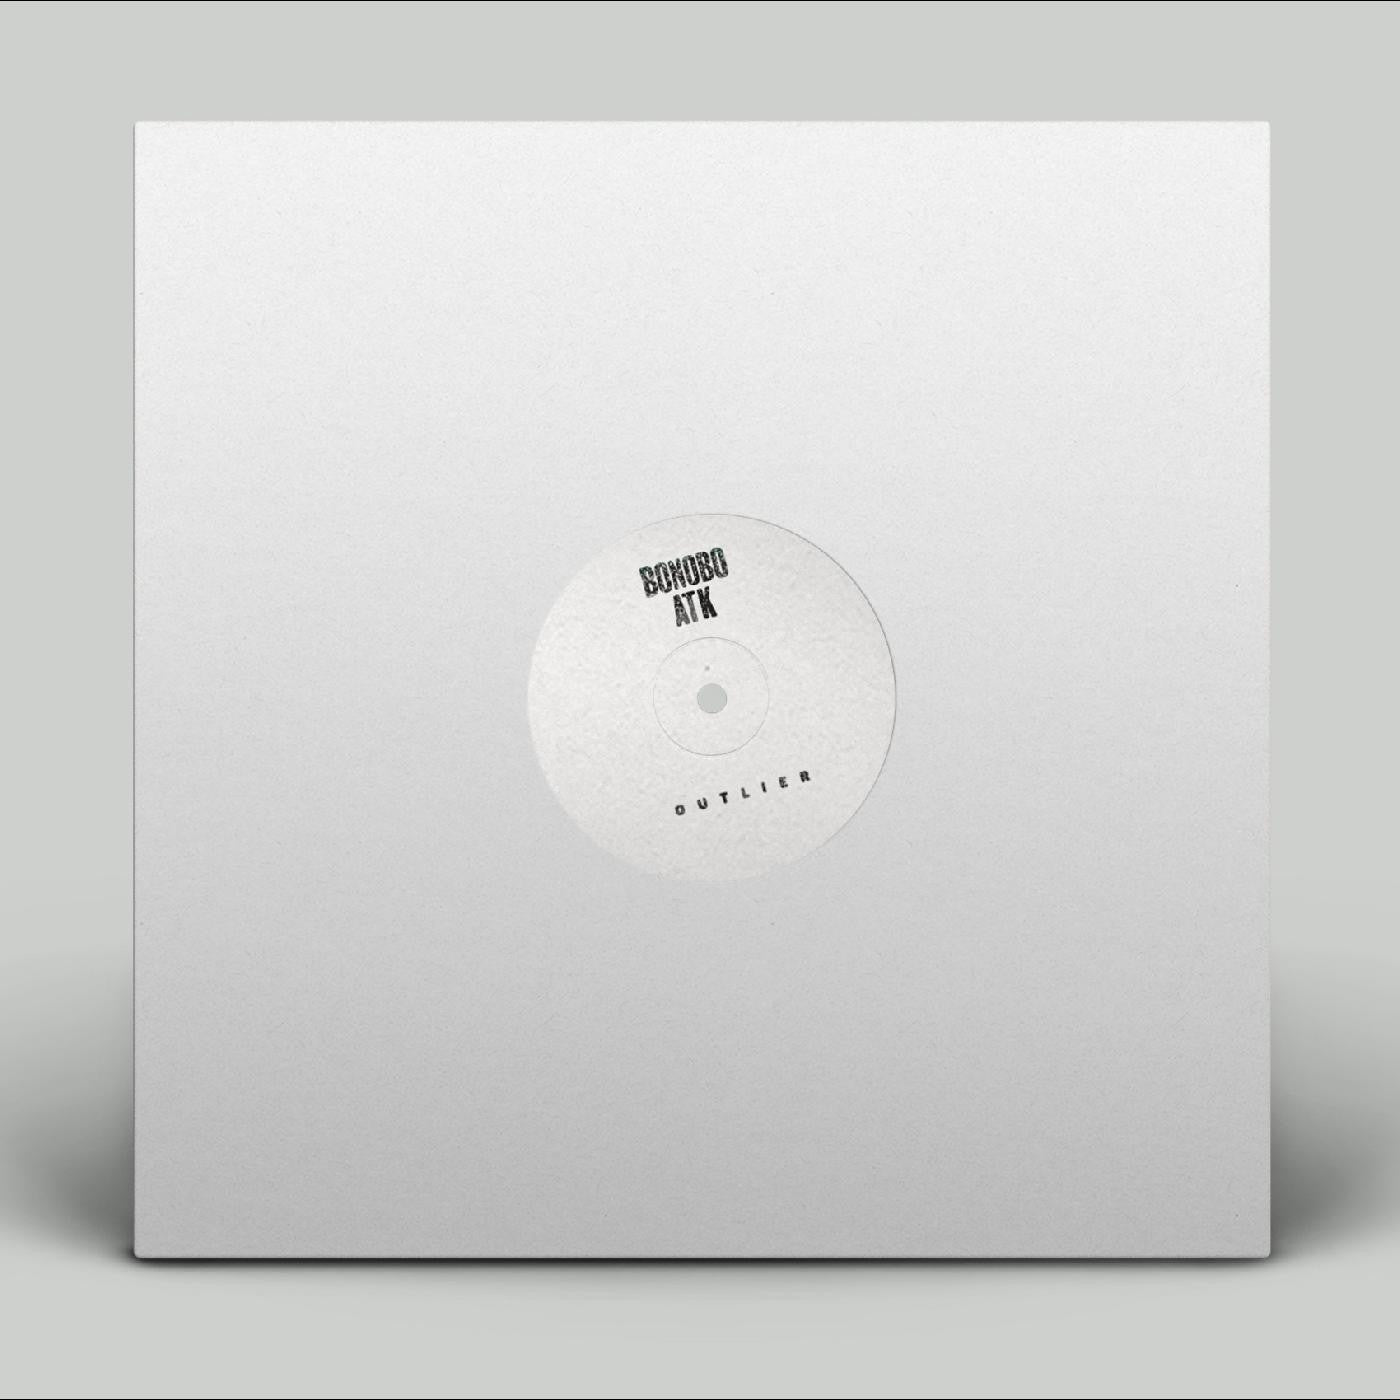 Bonobo - ATK (140 Gram, Limited Edition, Hand Numbered w/ Hand Stamped Release Info, White Popset Sleeve)